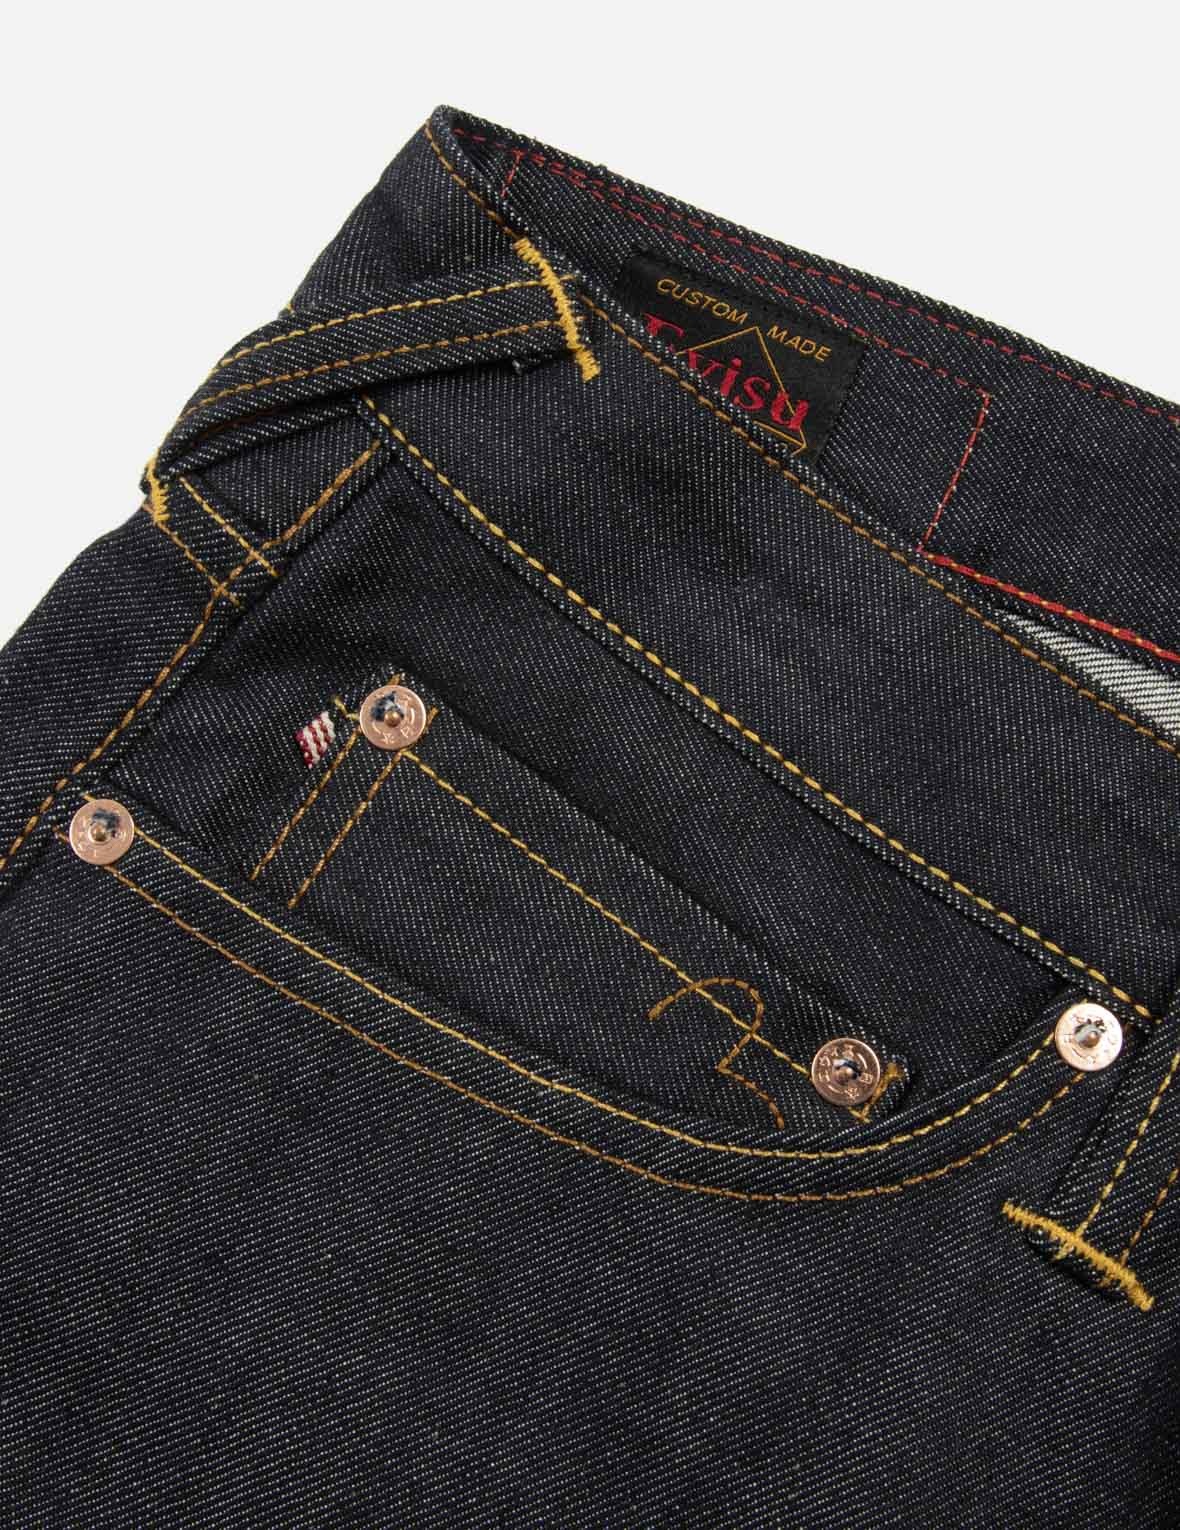 DEER AND SEAGULL EMBROIDERY SLIM FIT SELVEDGE DENIM JEANS #2010 - 9